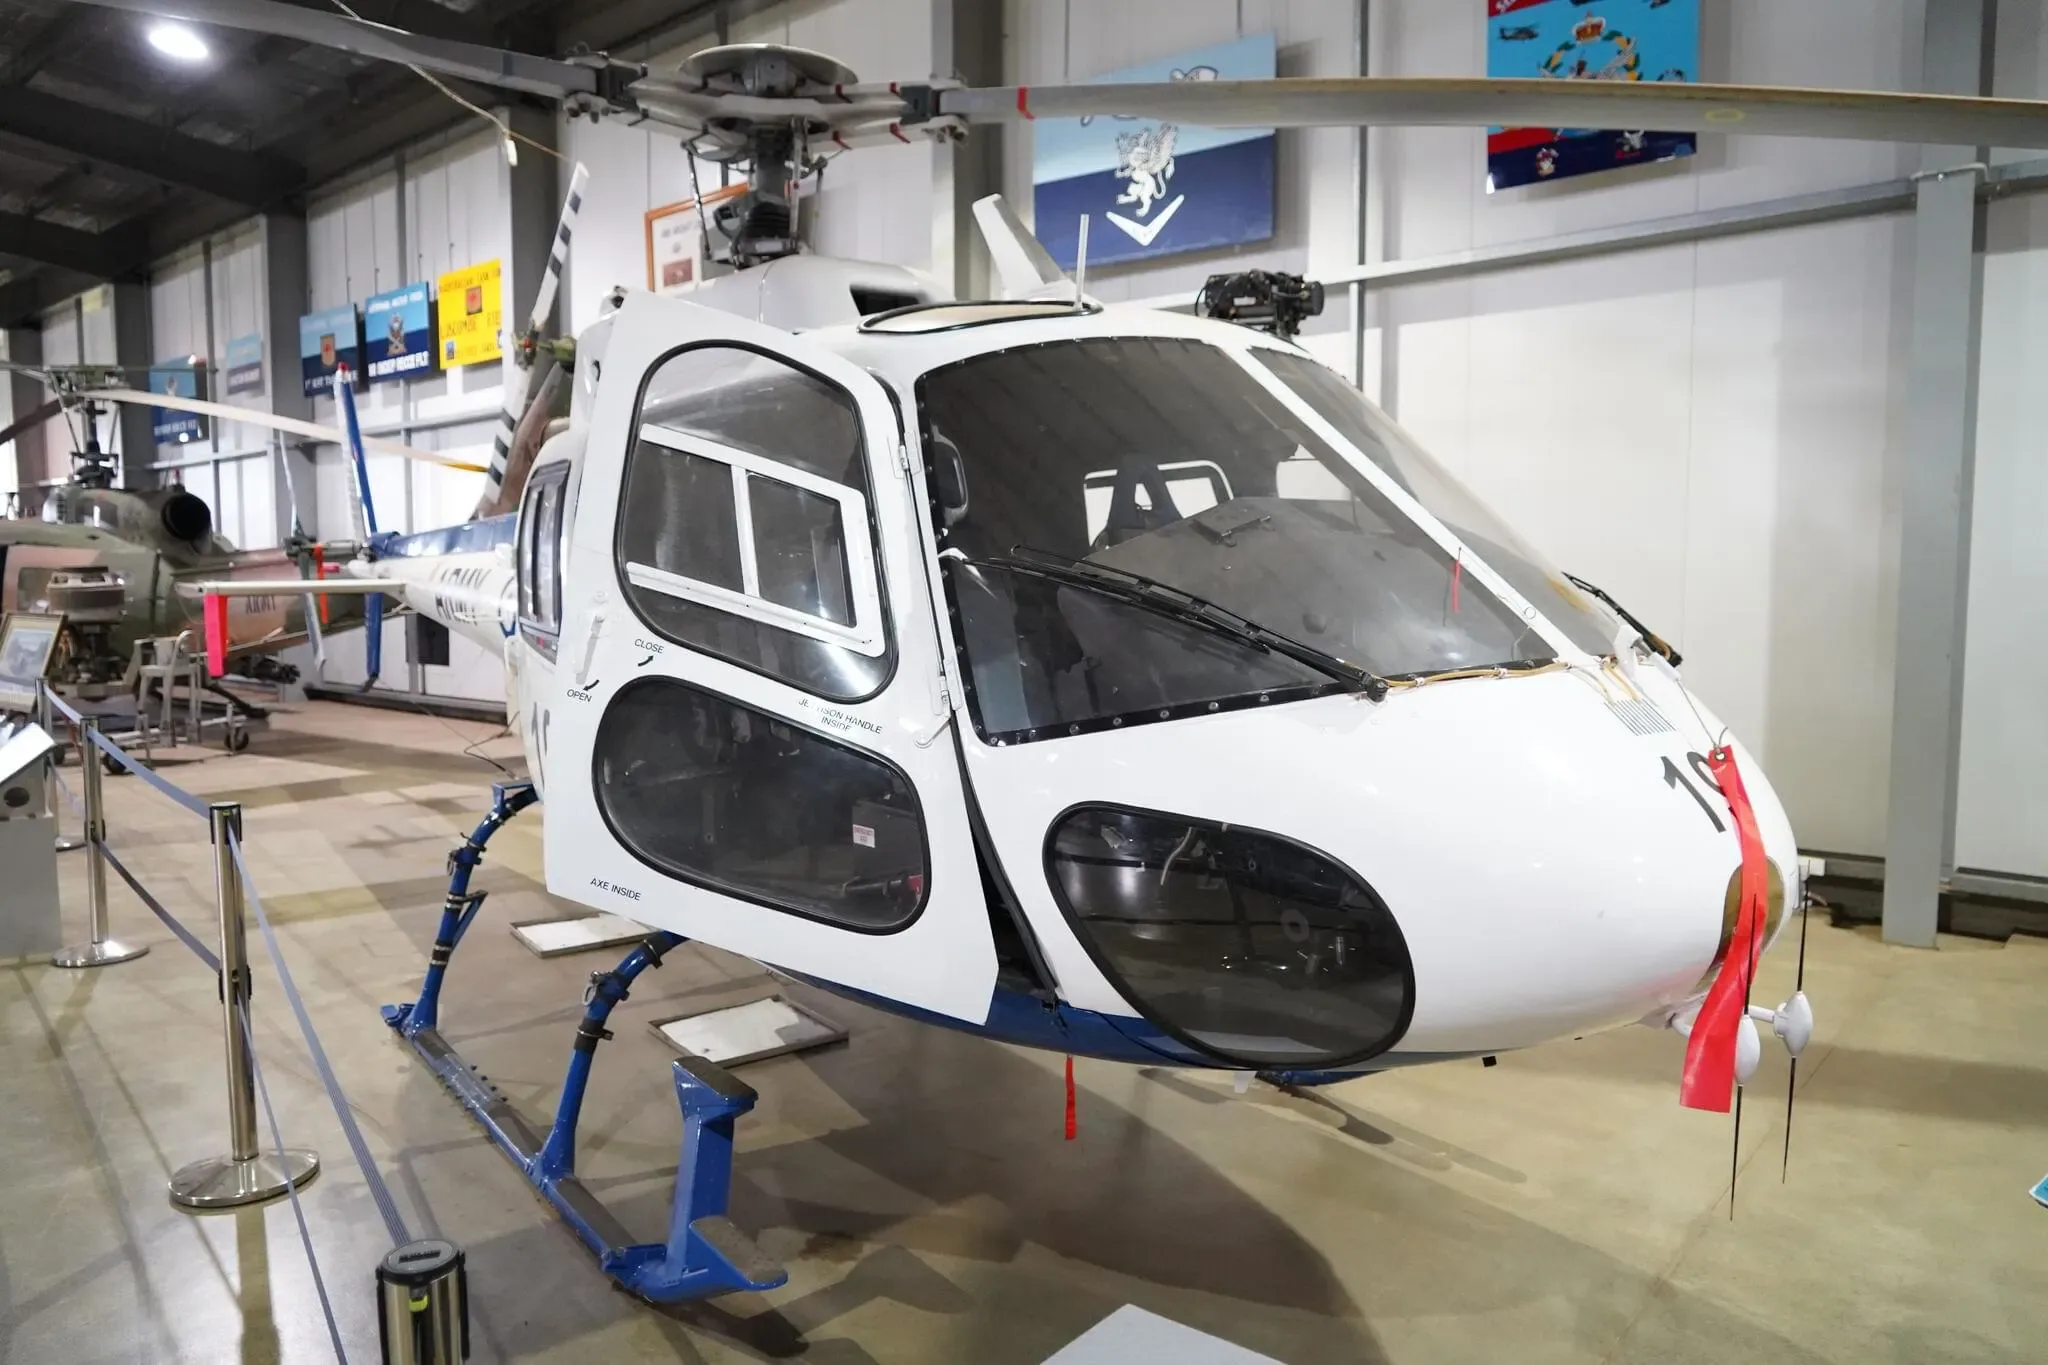 78 photos of Civilian Helicopter Squirrel AS 350B